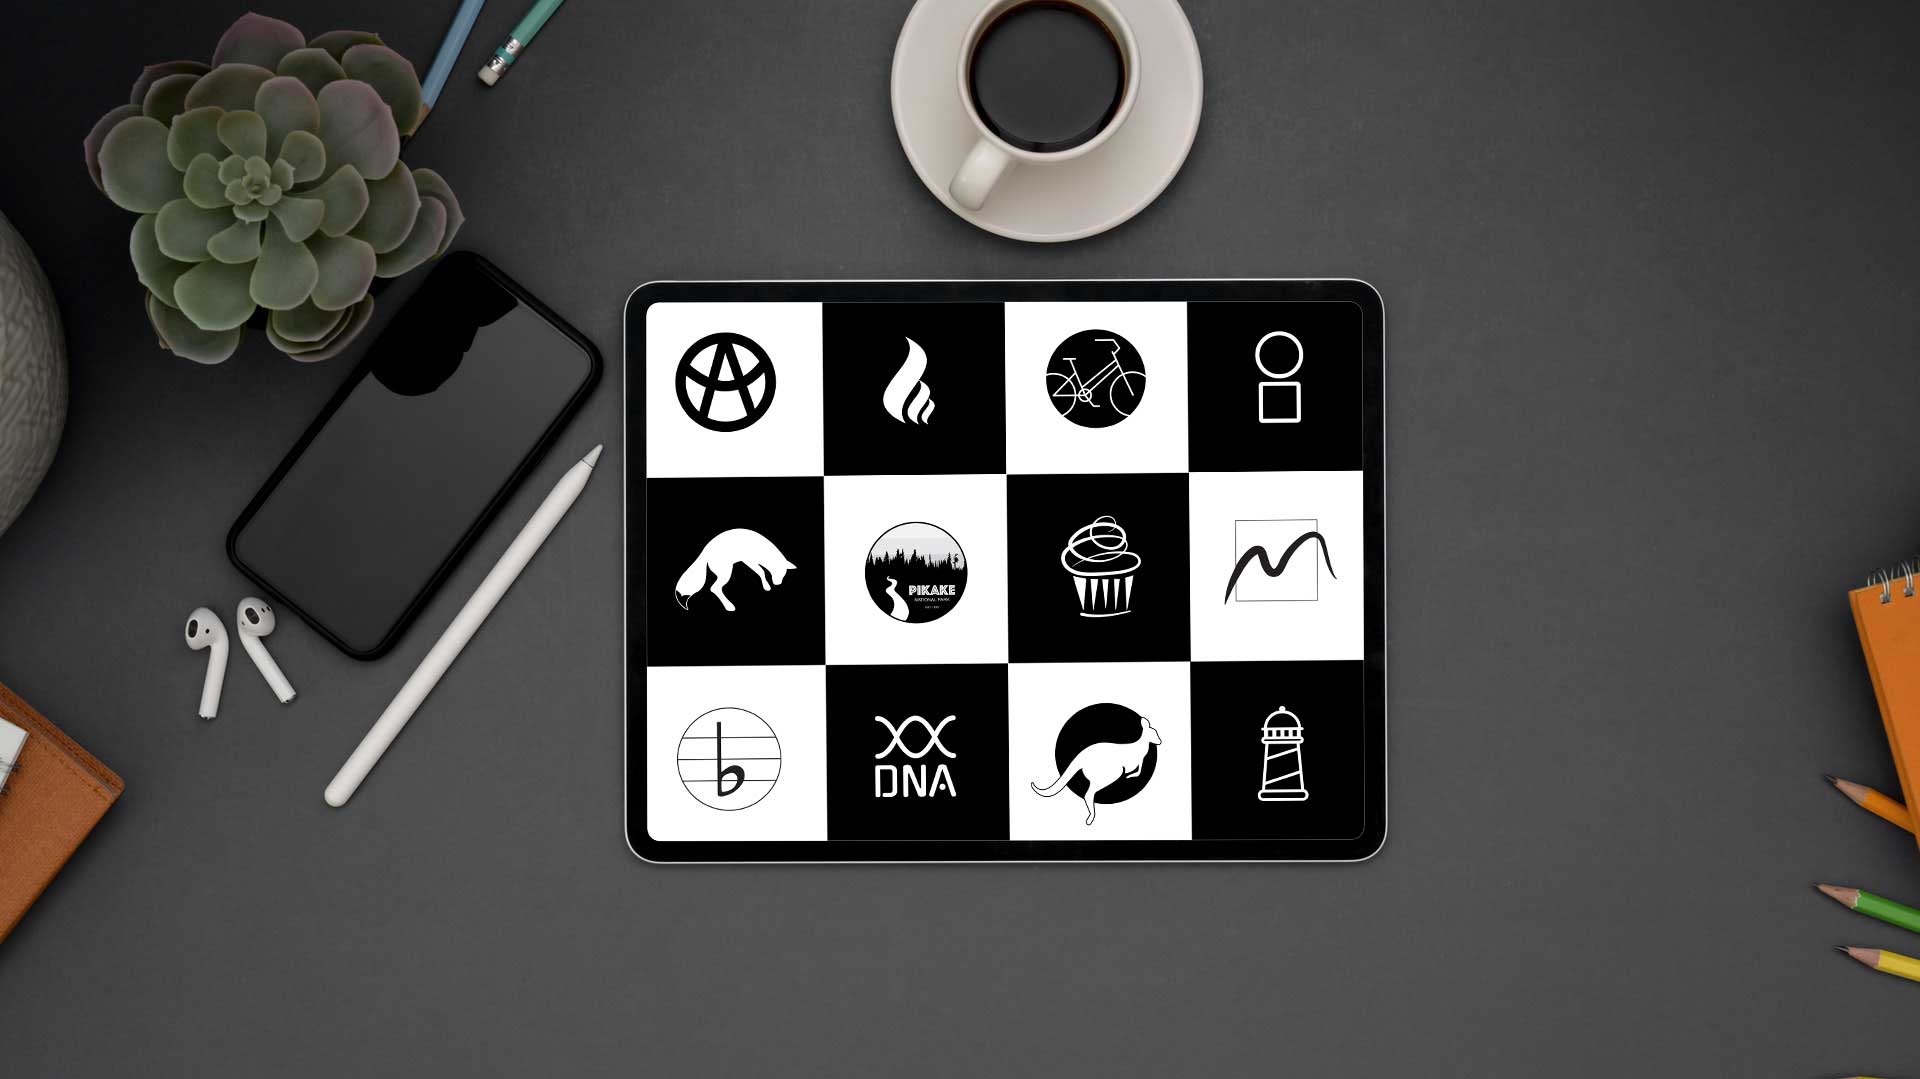 Tablet on a tabletop displaying logo designs